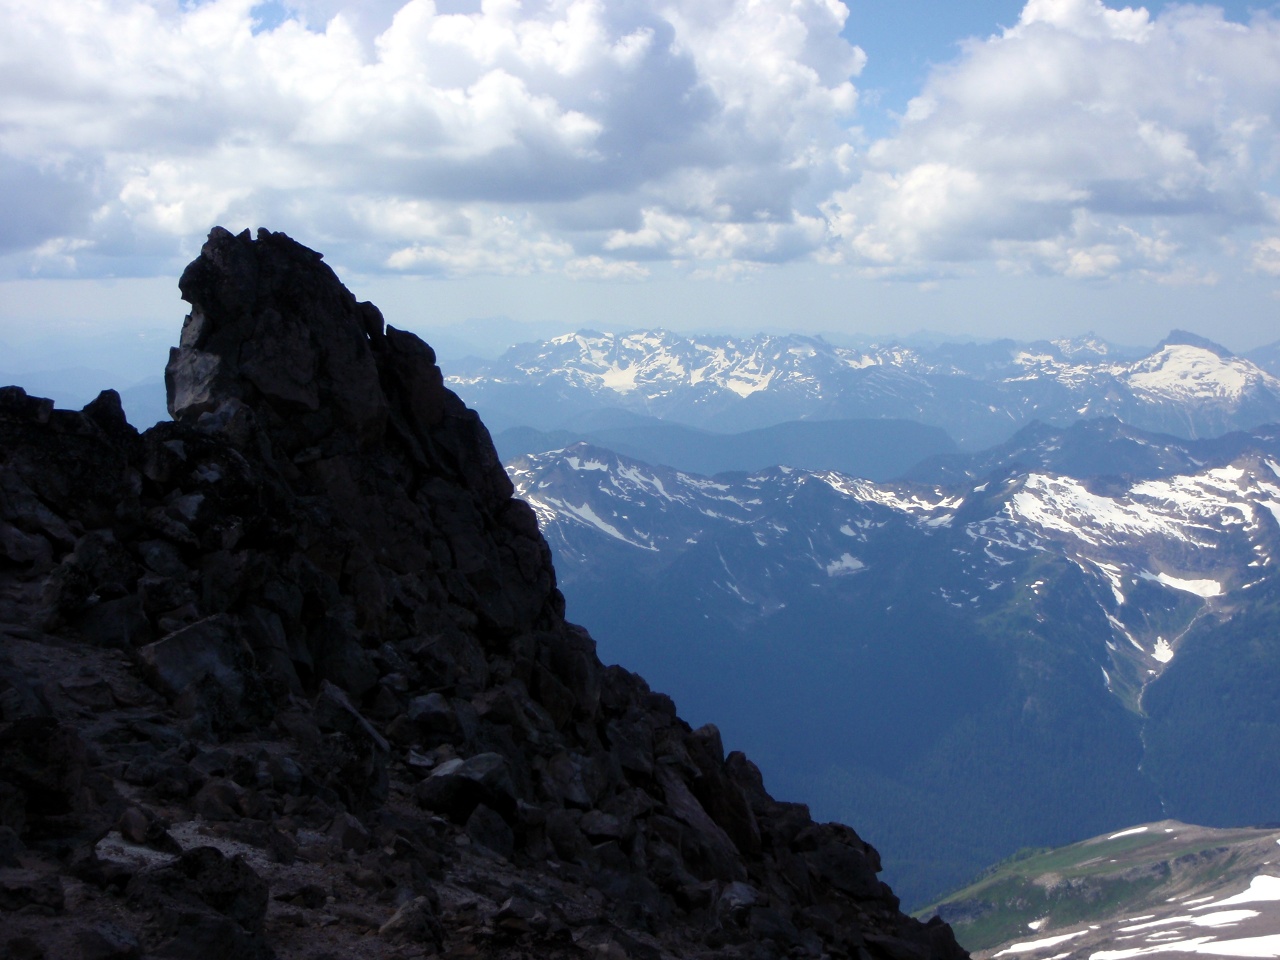 Rocky outcrop on Disappointment Peak